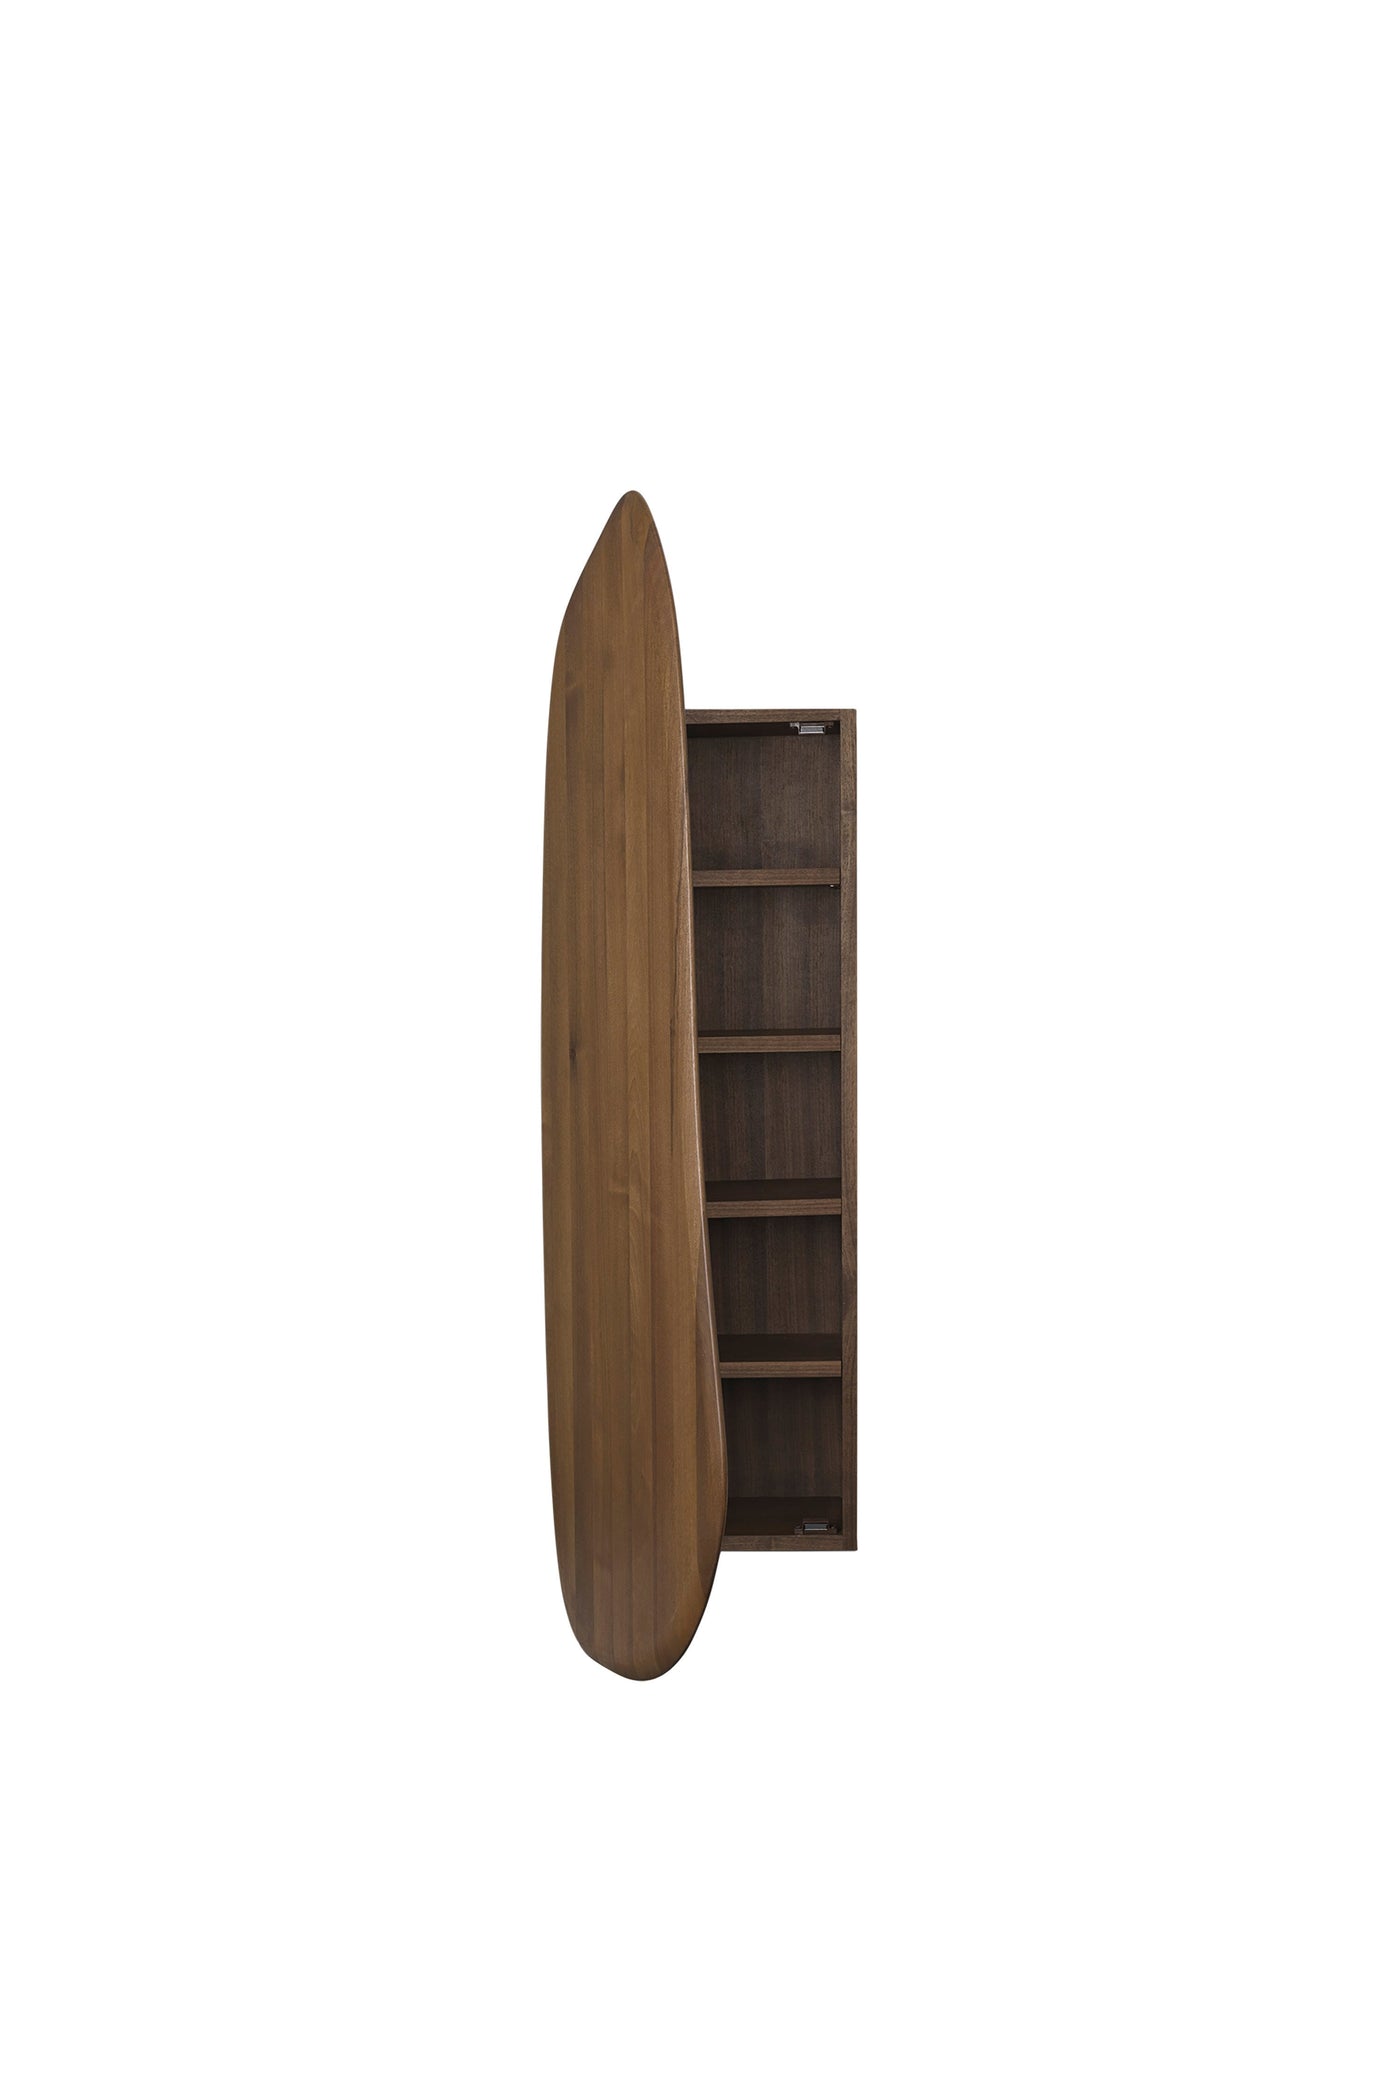 ferm LIVING Feve Wall Cabinet inside detail. Free UK delivery from someday designs